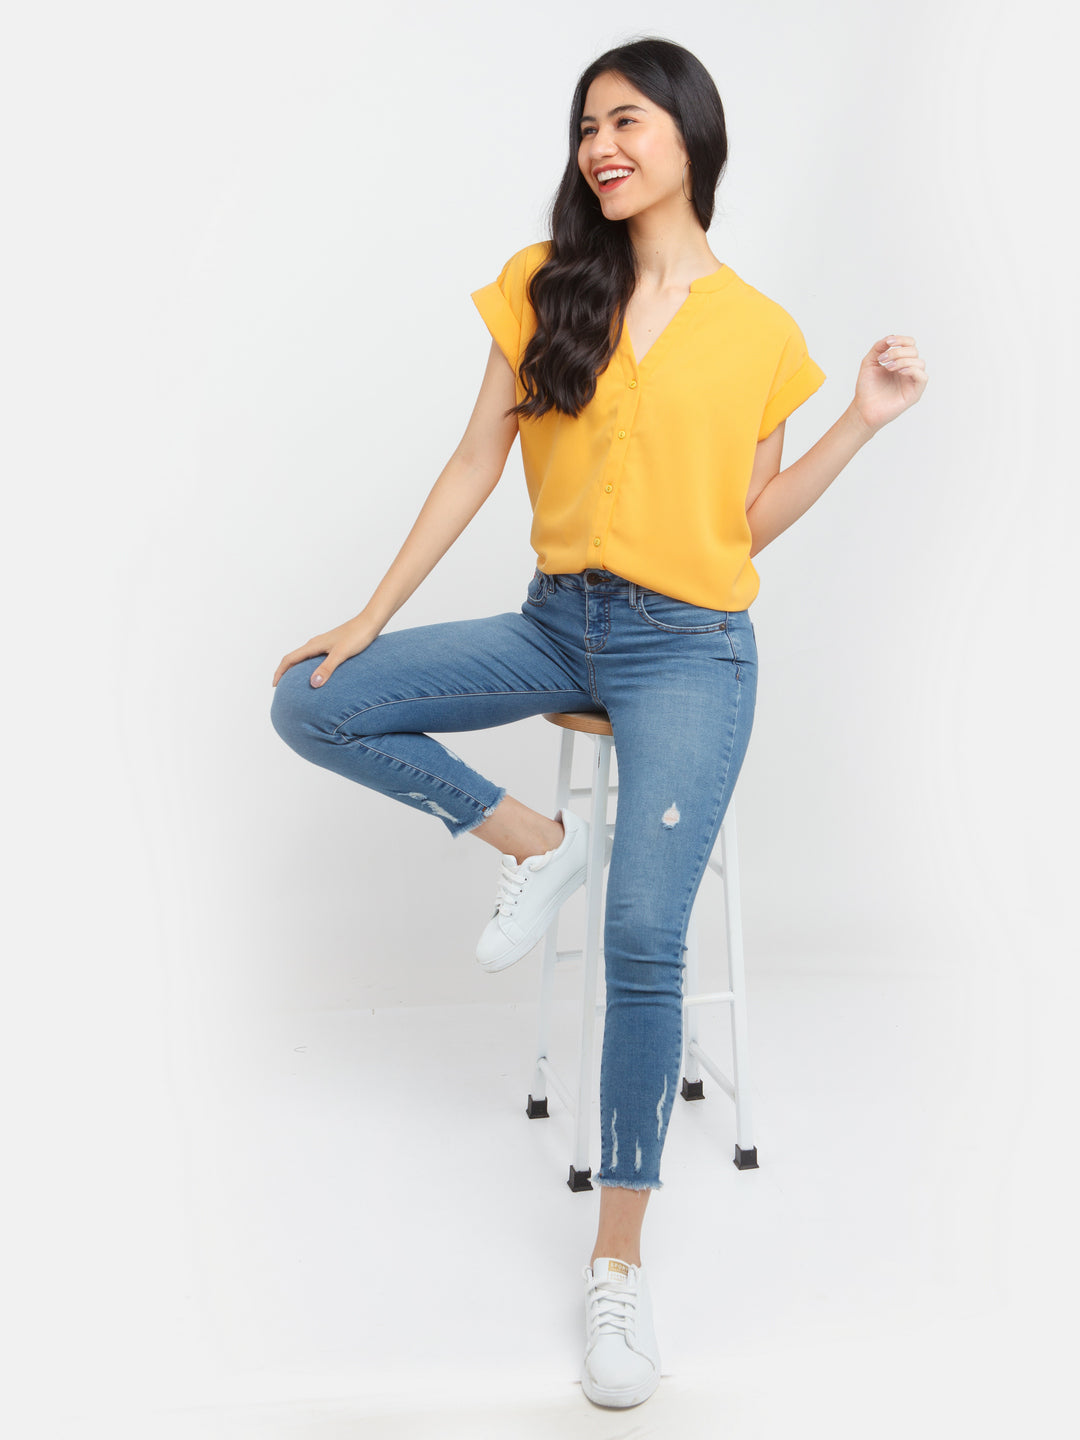 Yellow Solid Top For Women